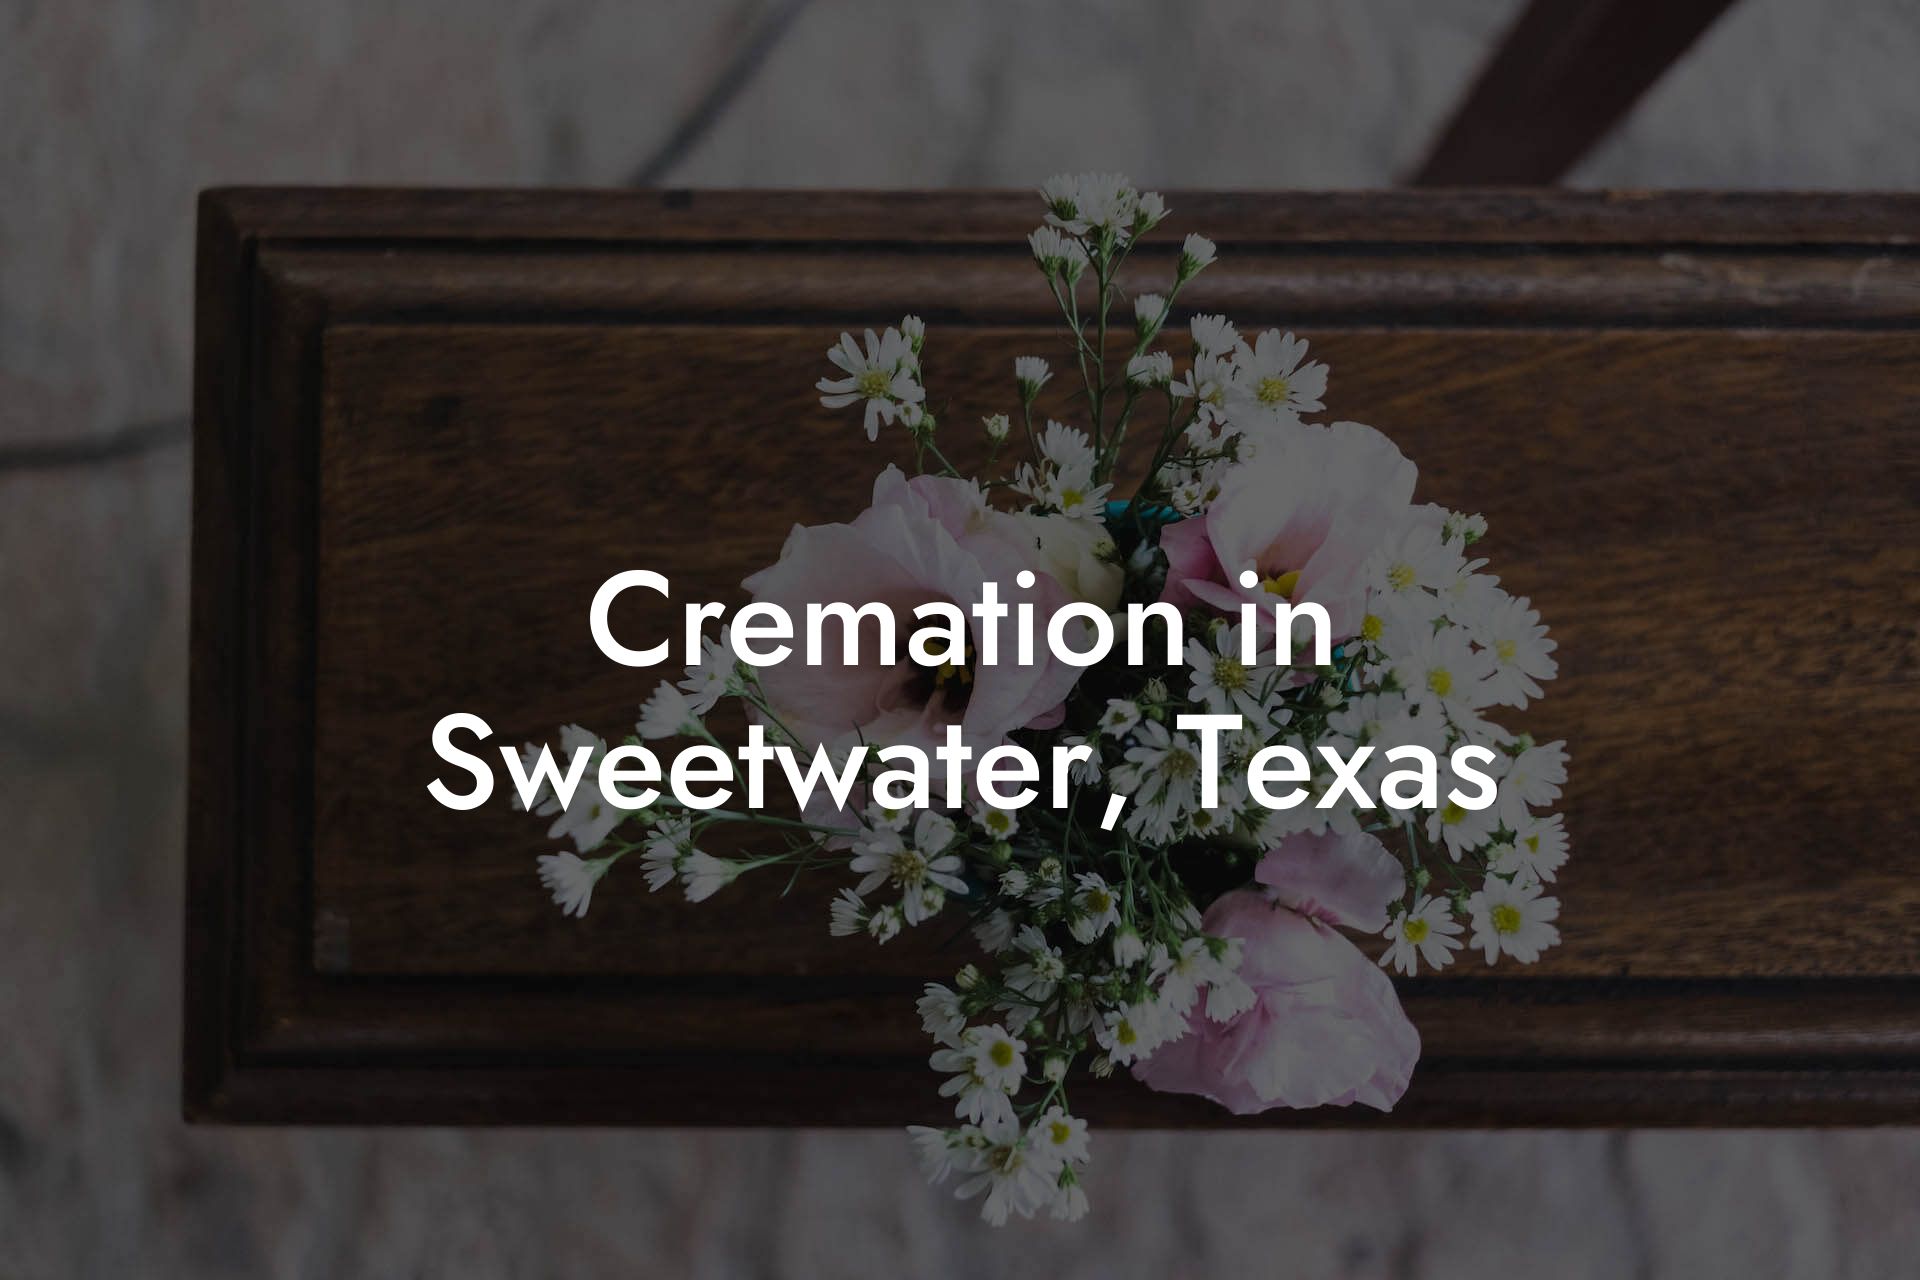 Cremation in Sweetwater, Texas